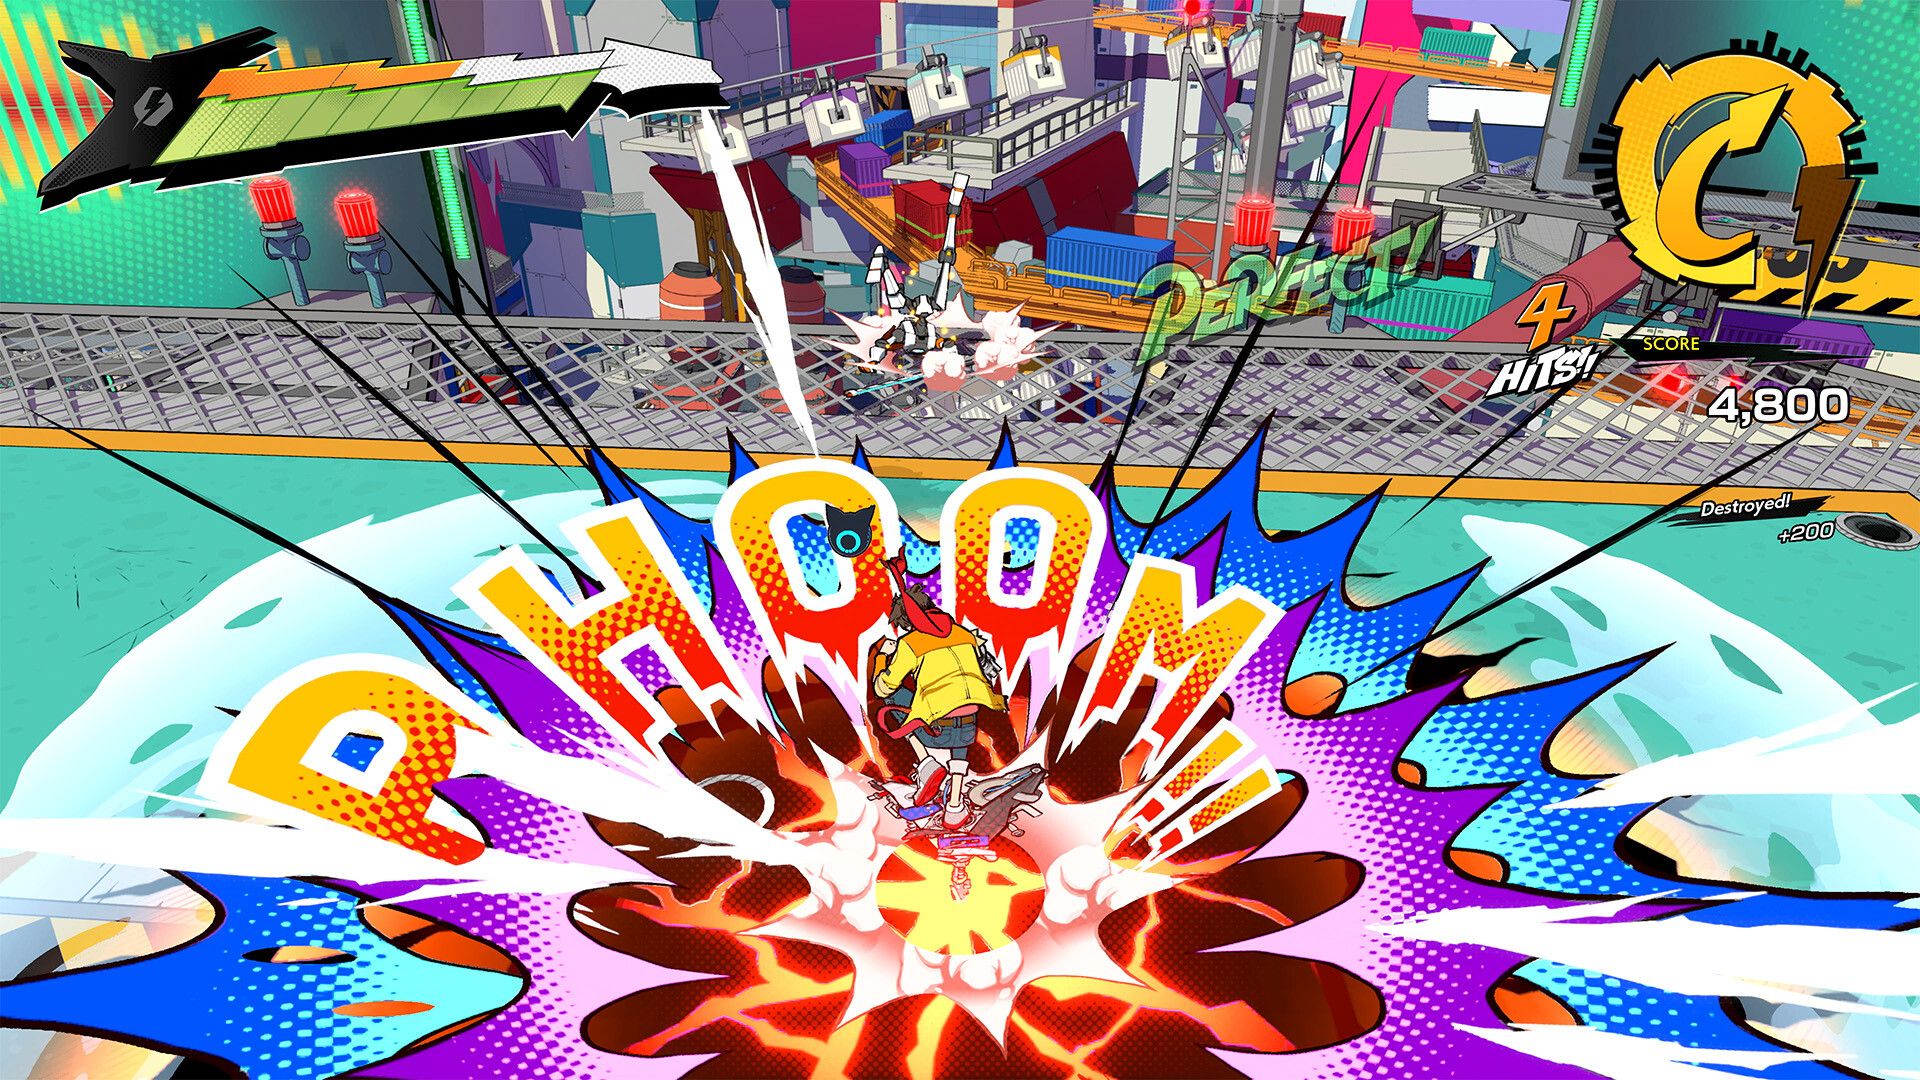 Screenshot from the game: Chai lands a massive hit in a fight, resulting in a comicbook-style PHOOM! 